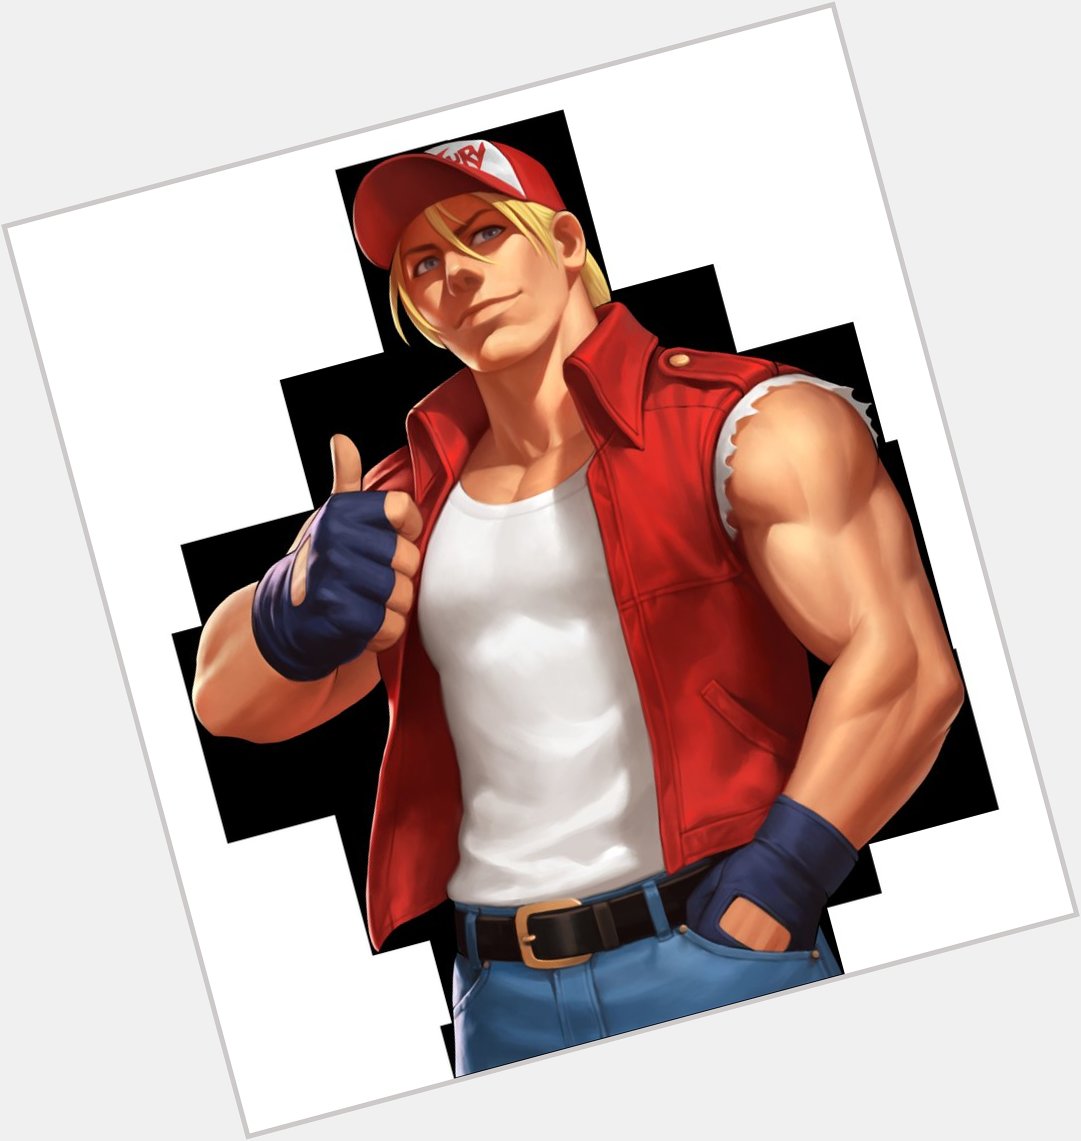 Happy birthday to the lad himself, Terry Bogard. 